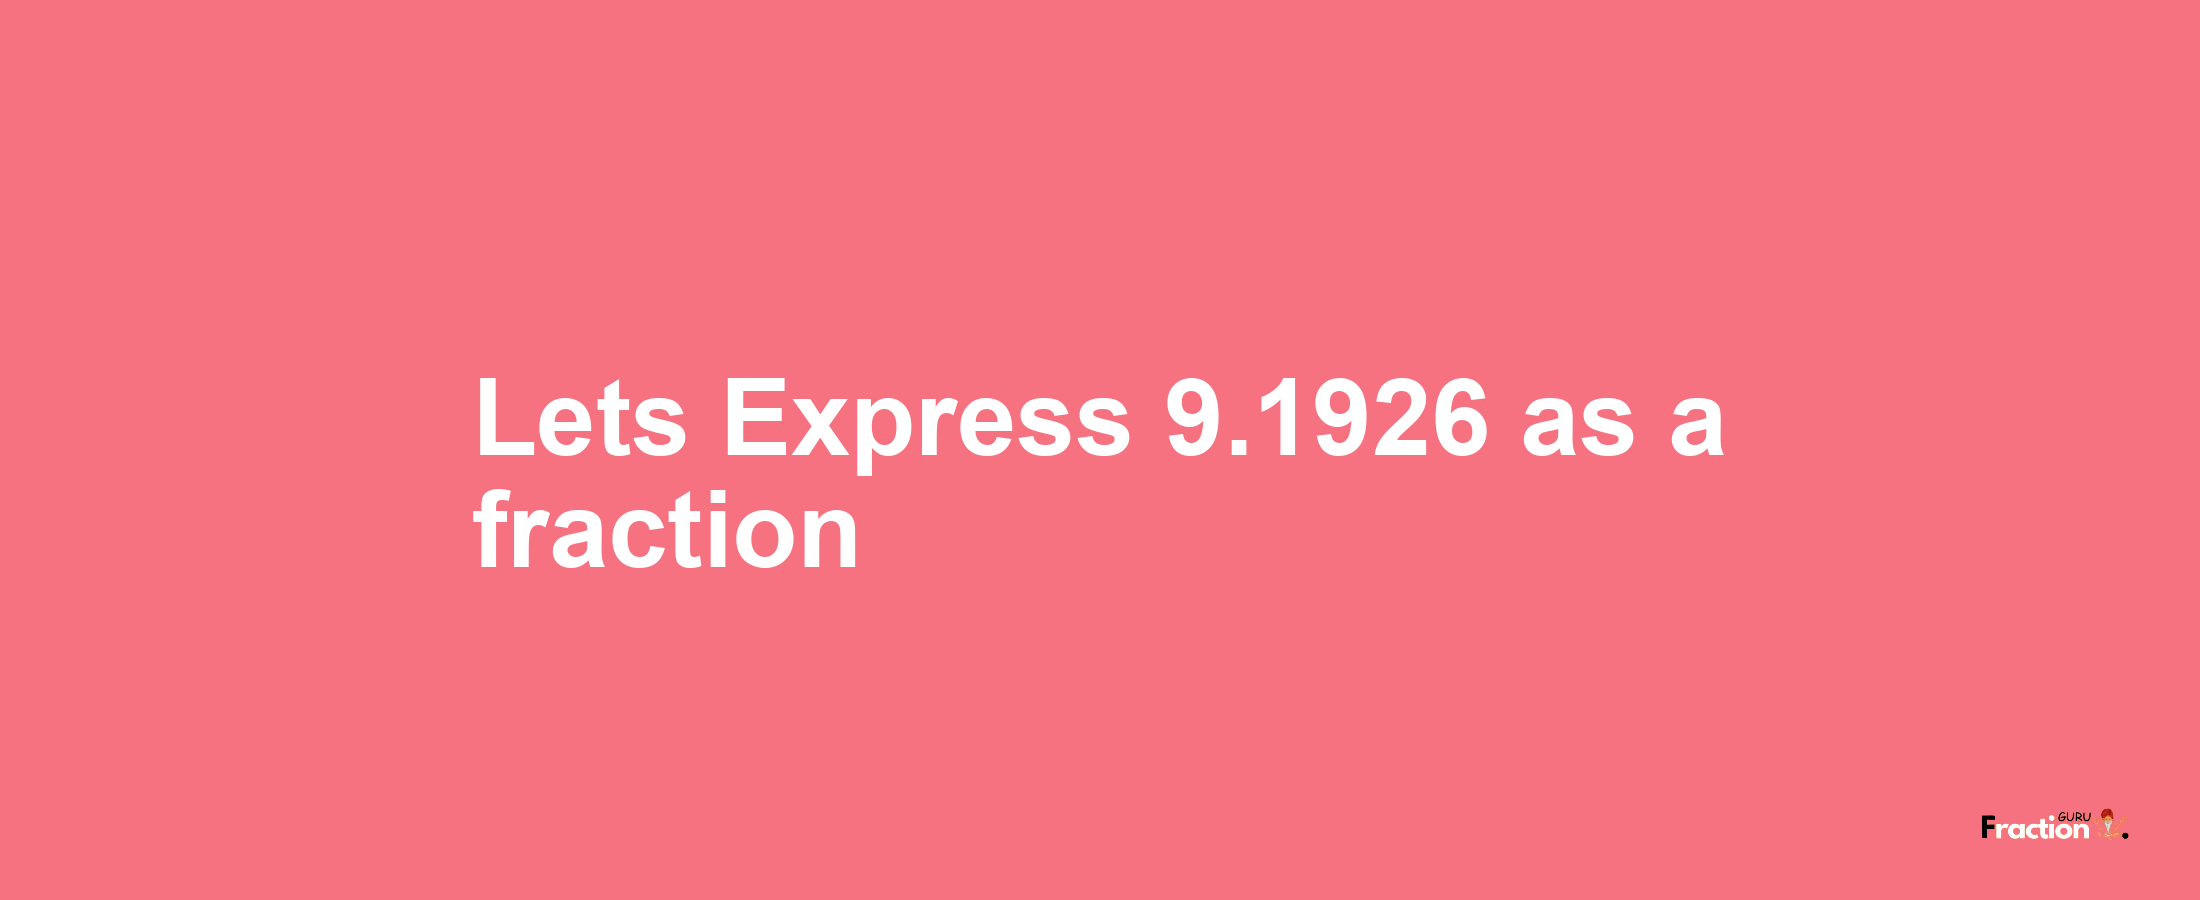 Lets Express 9.1926 as afraction